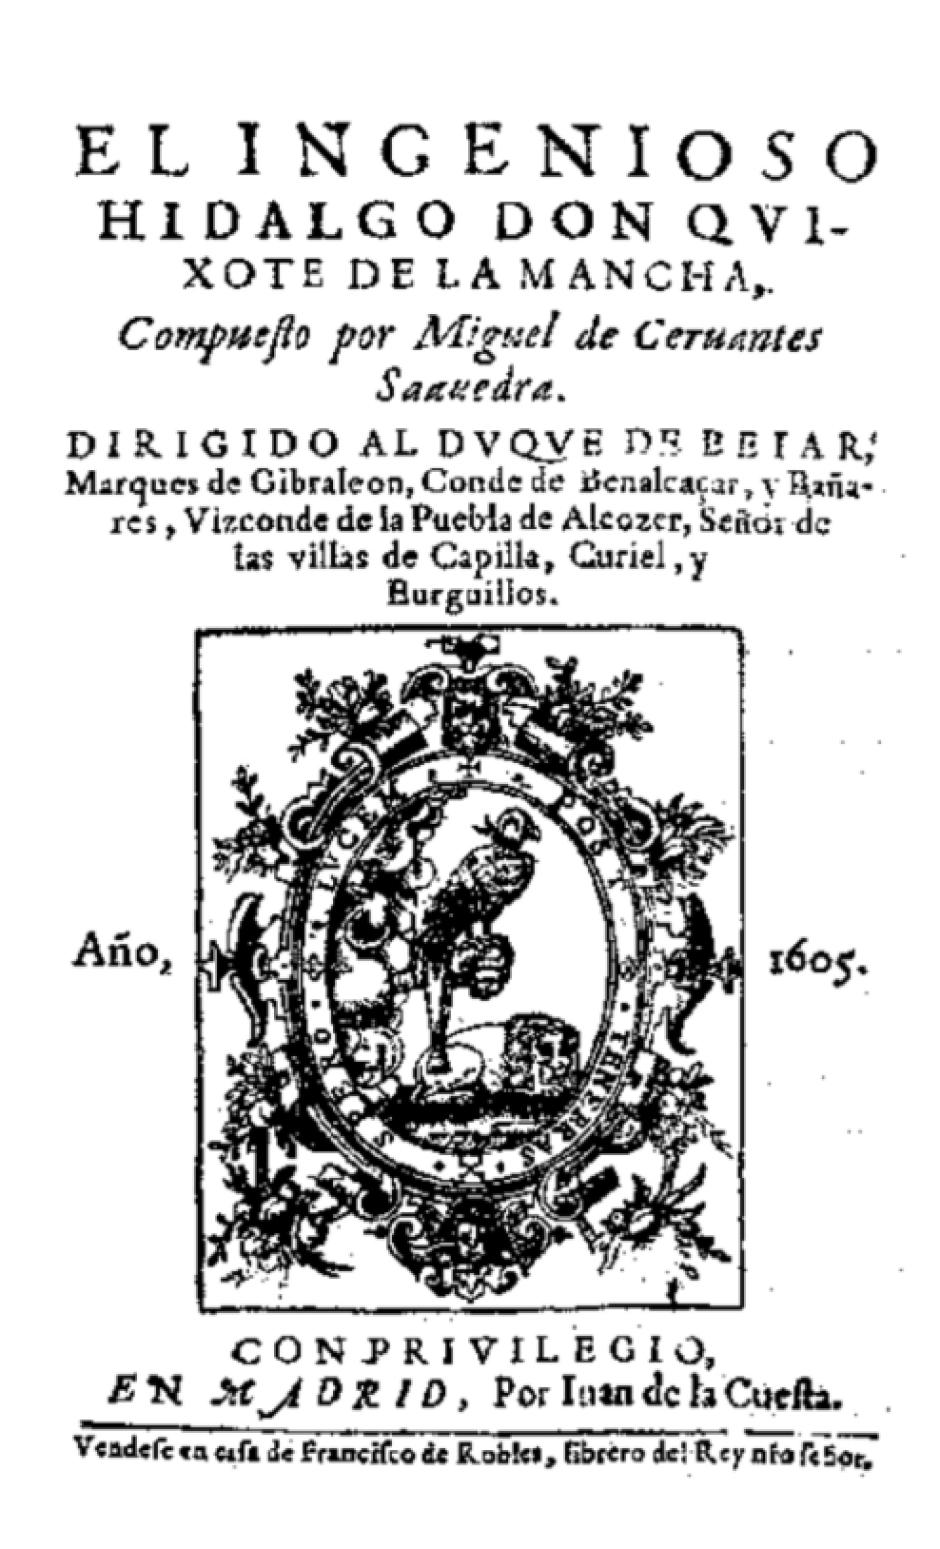 Don quijote 1605